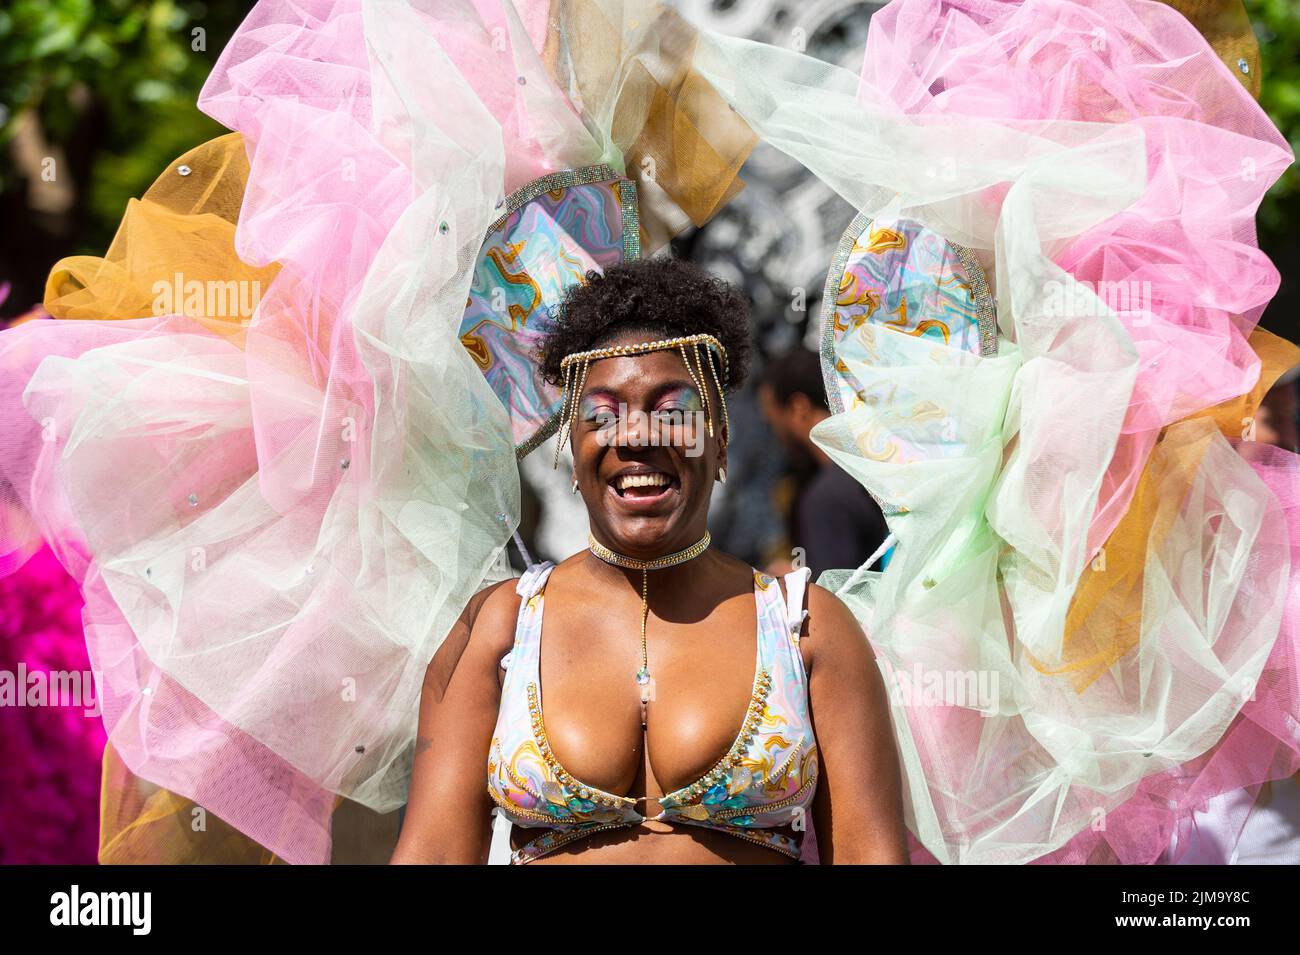 London, UK.  5 August 2022. A member of Funatiks costumes performs at Carnival in Chelsea, a community event showcasing carnival costumes, music and culture ahead of Notting Hill Carnival.  The show is part of this year’s Kensington & Chelsea Festival.  Credit: Stephen Chung / Alamy Live News Stock Photo